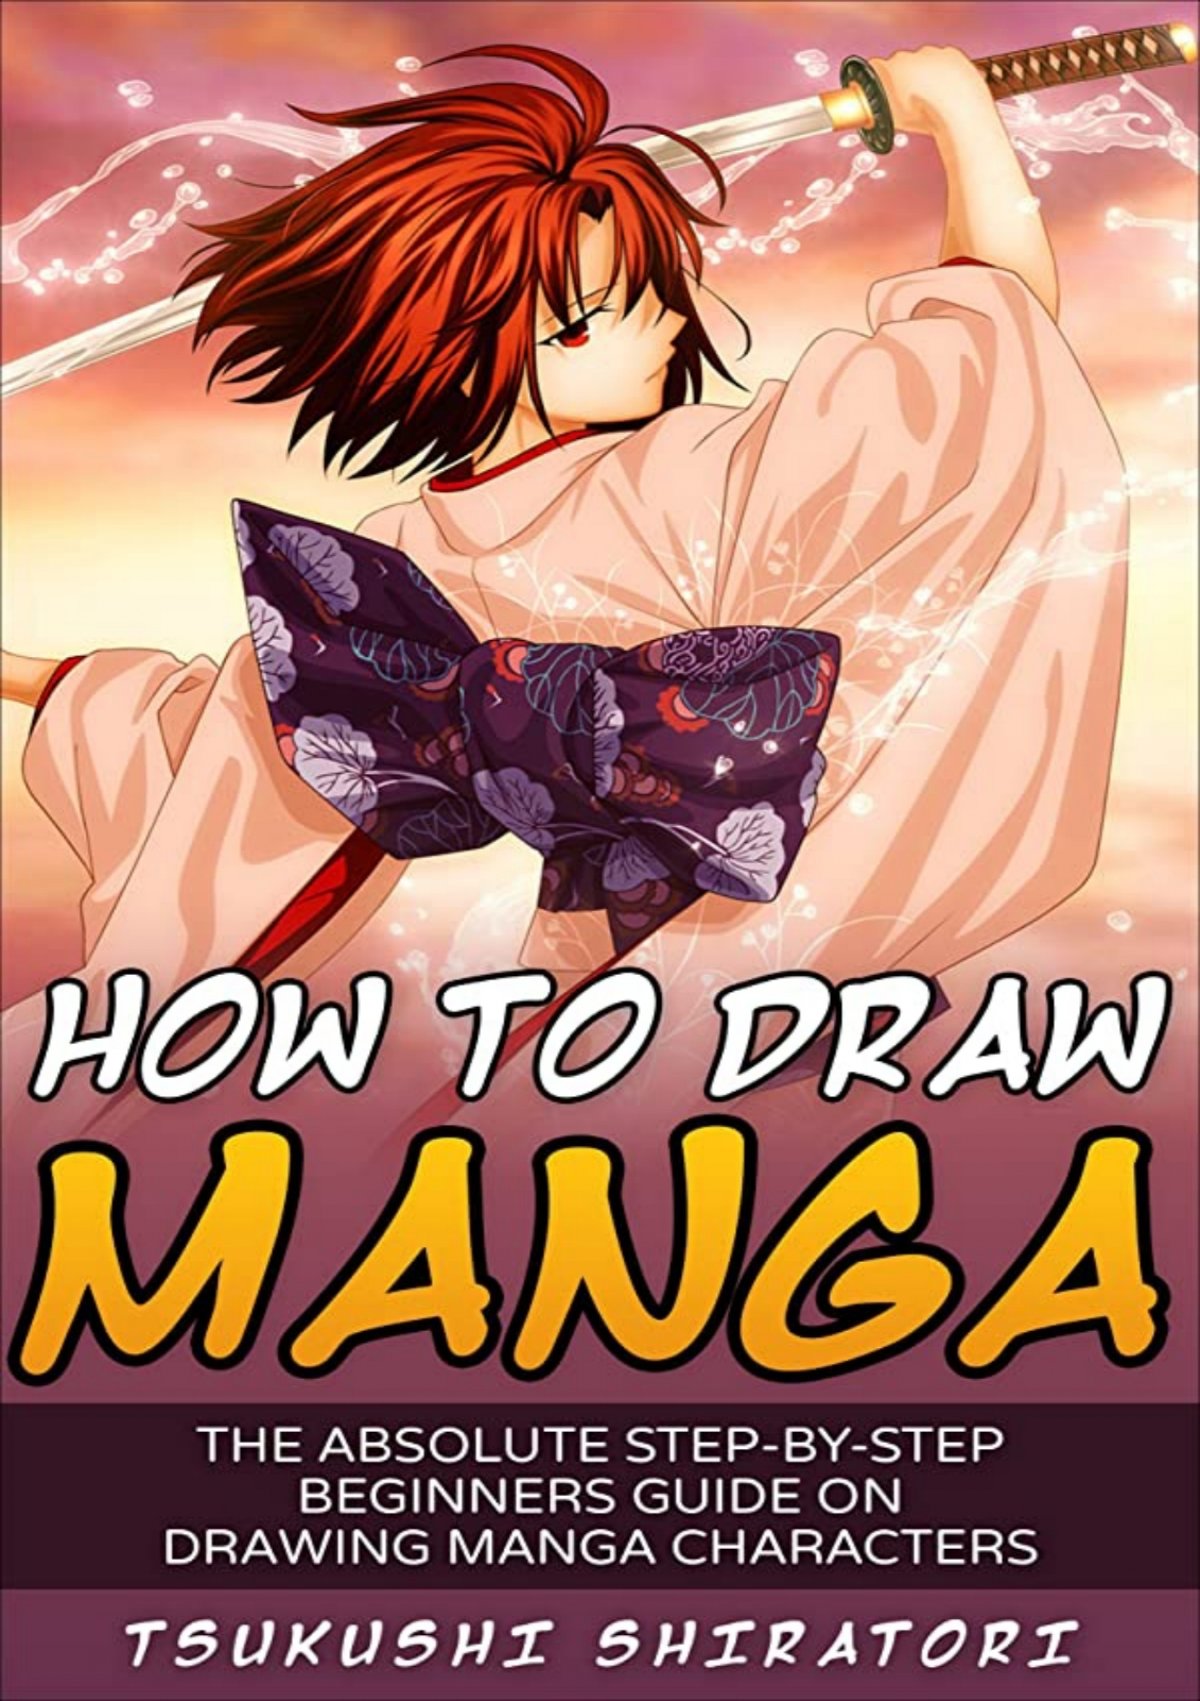 How to draw anime pdf download